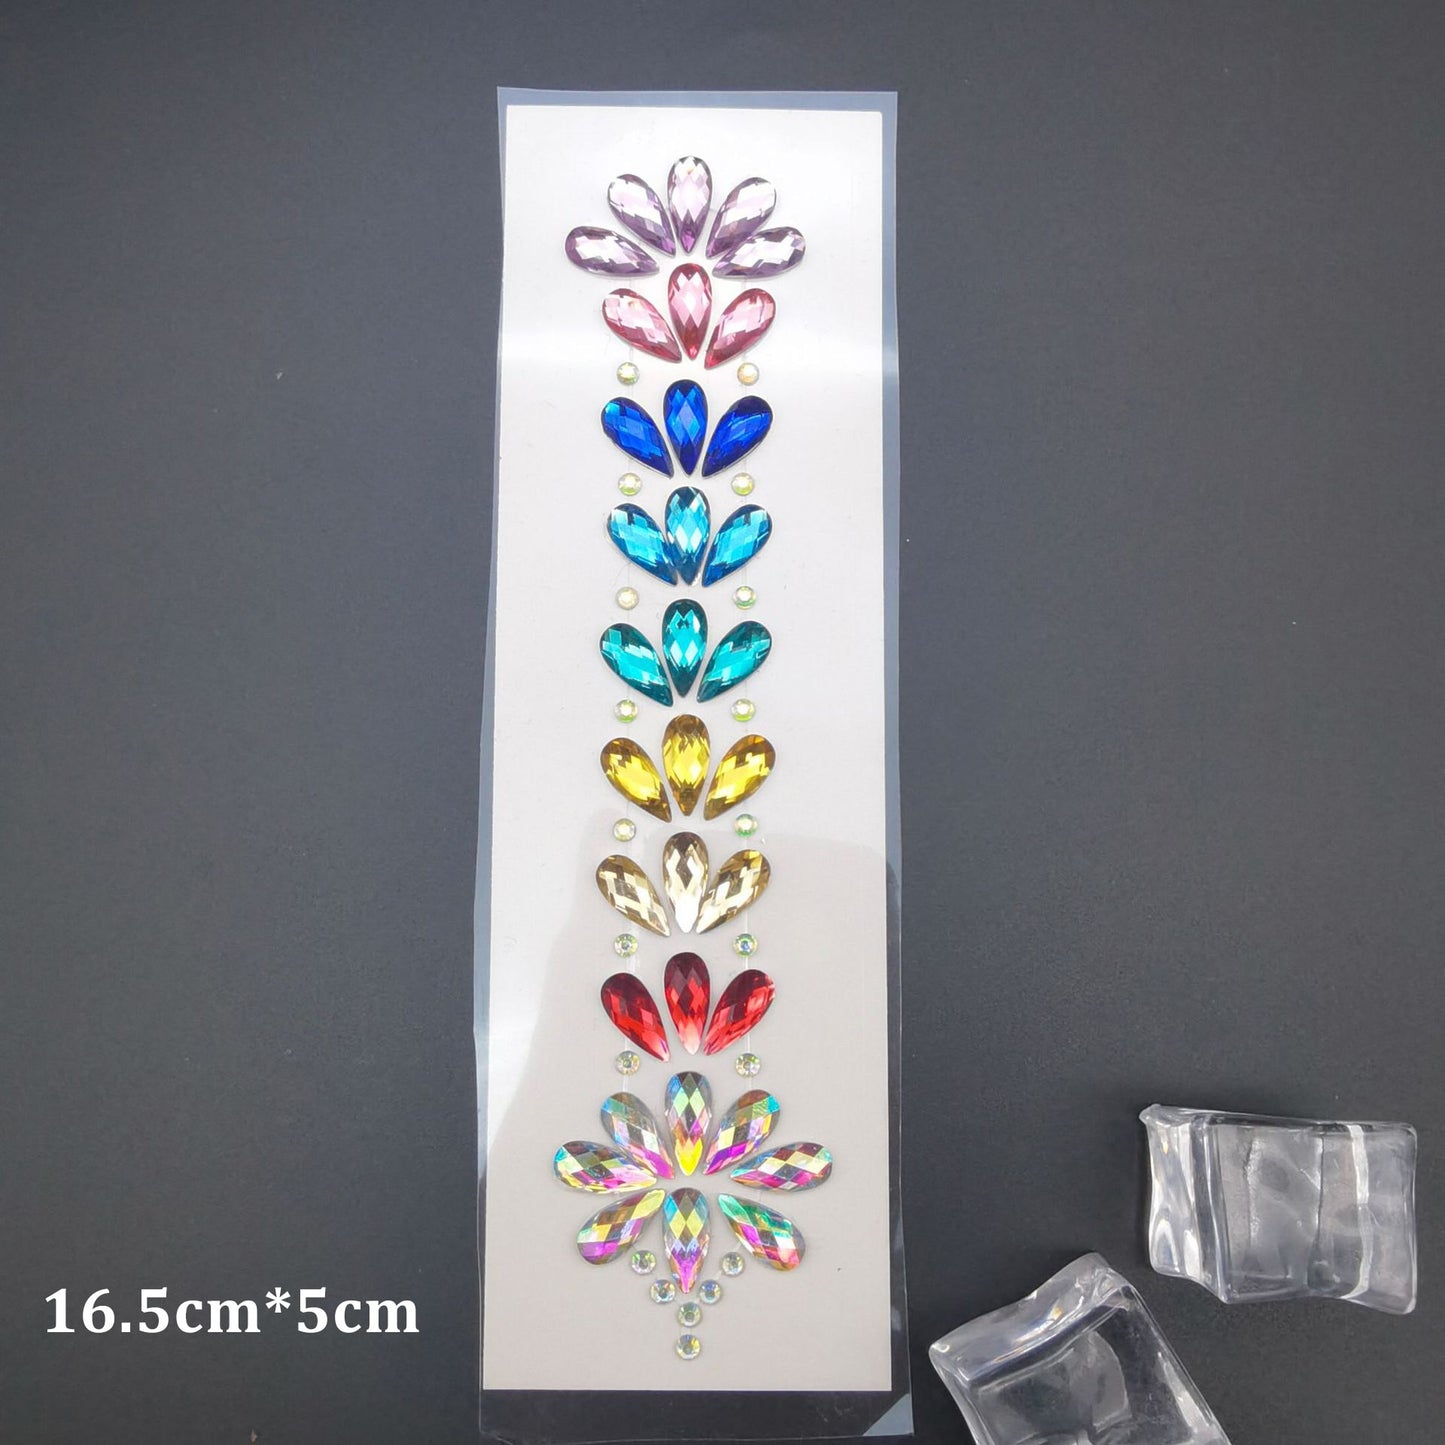 EDM 3D Crystal Stickers